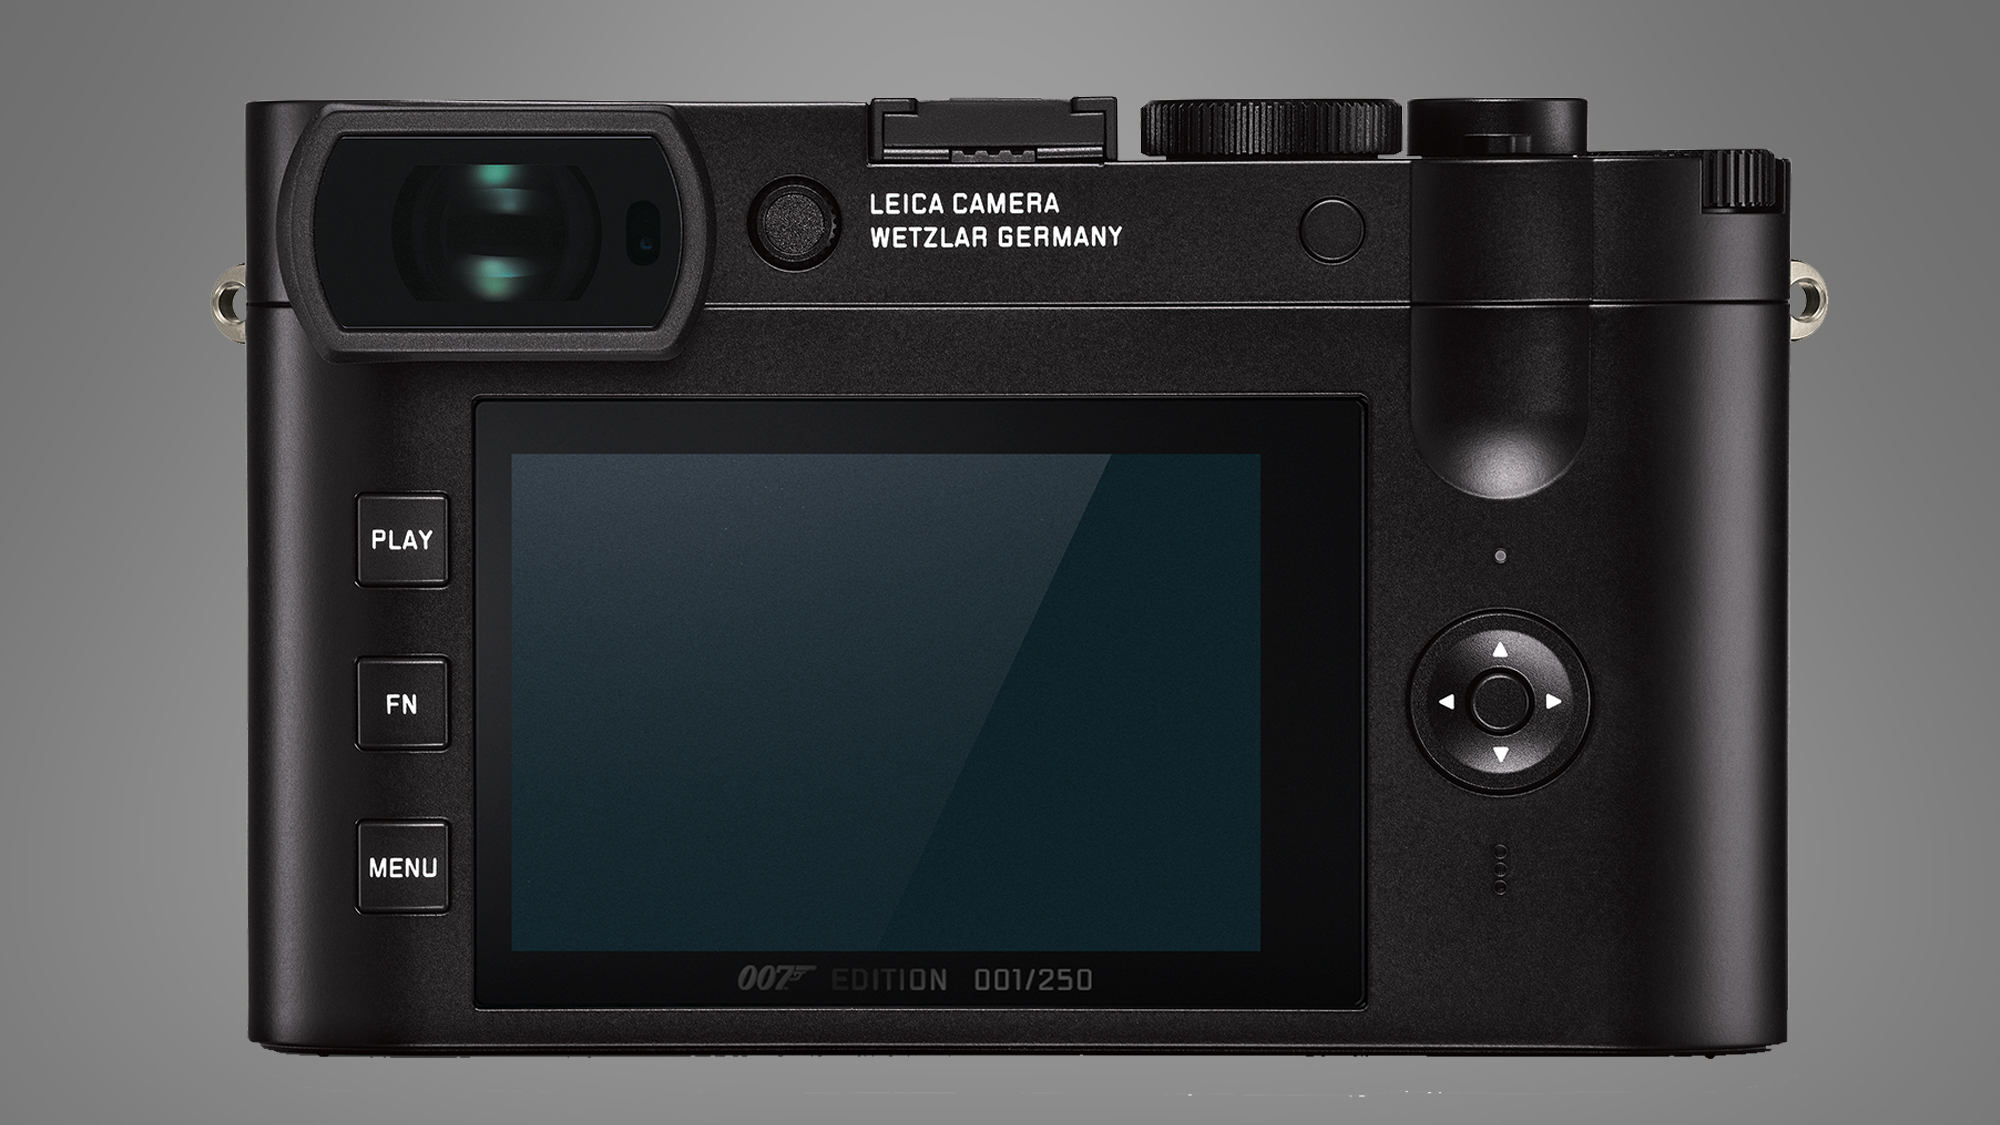 The back of the Leica Q2 007 edition camera